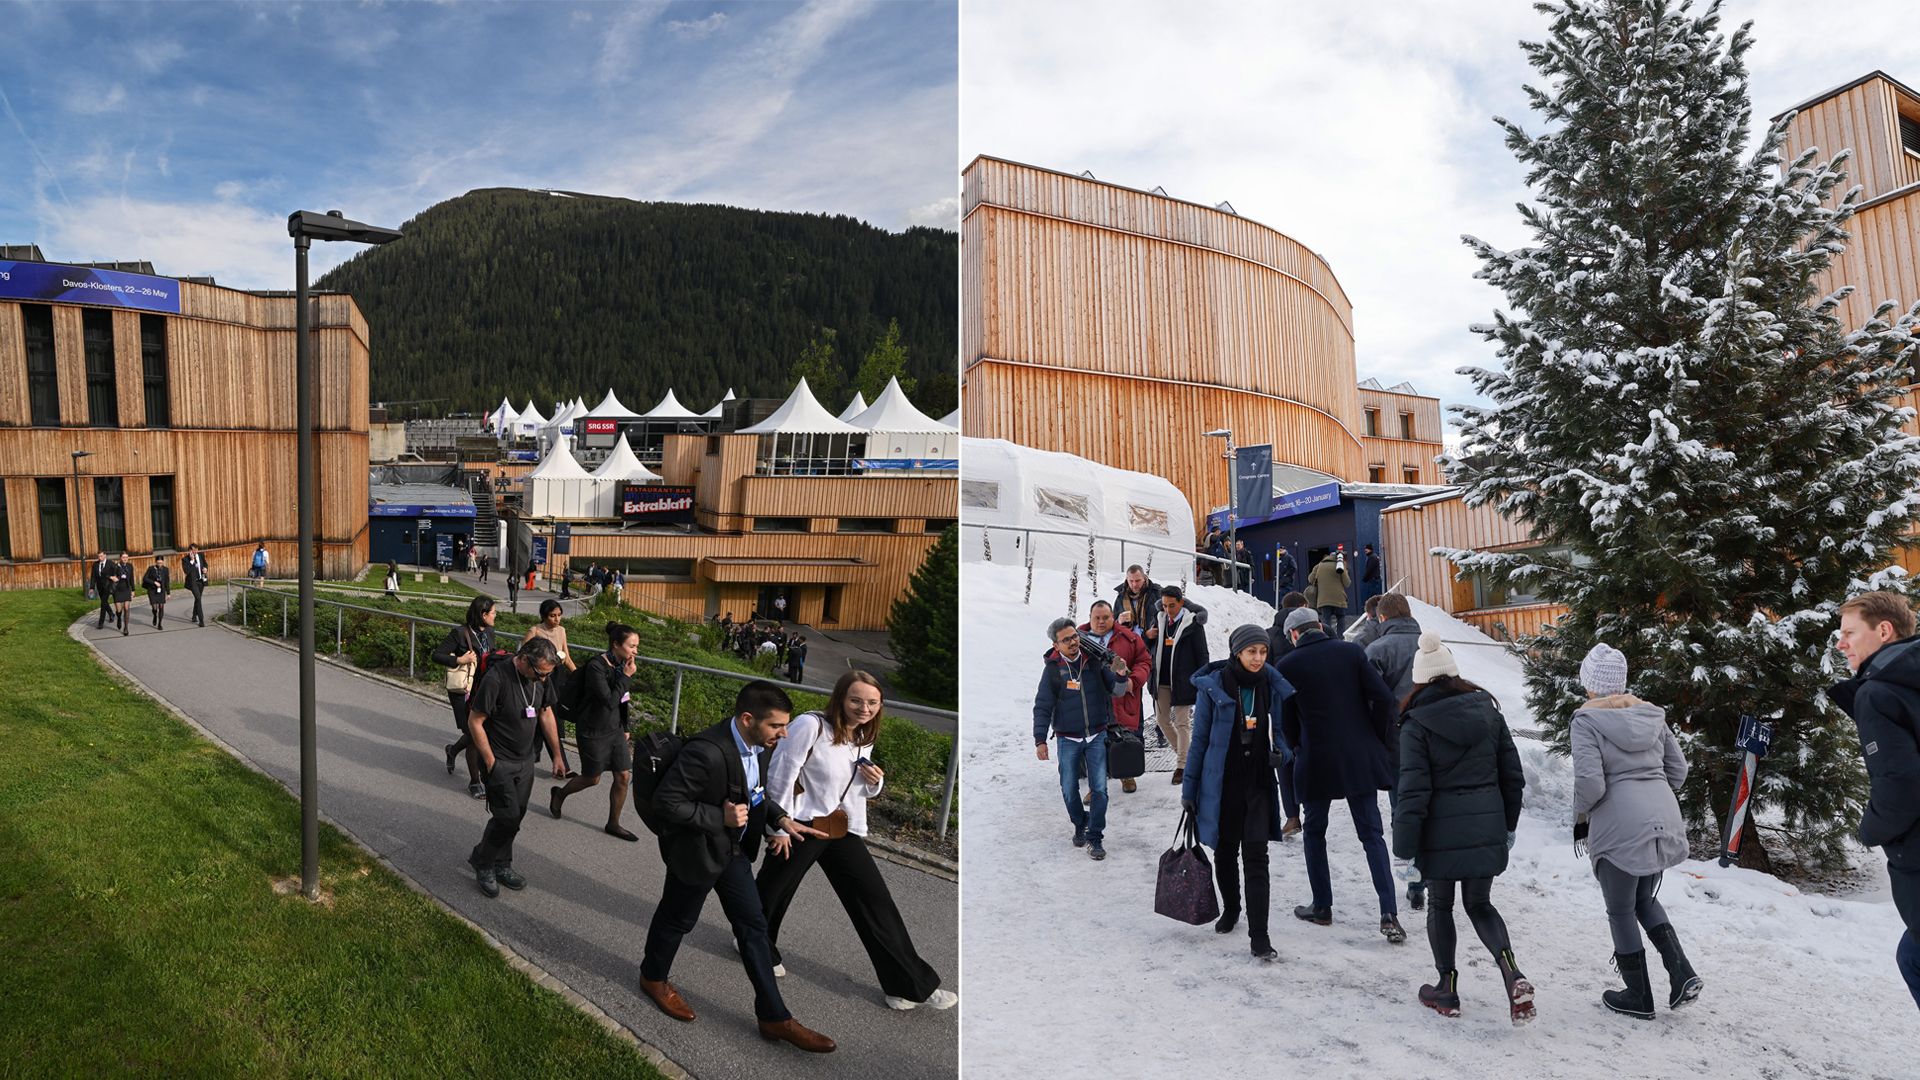 Left: Staff is walking outside the congress centre ahead of the World Economic Forum (WEF) annual meeting in Davos on May 21, 2022